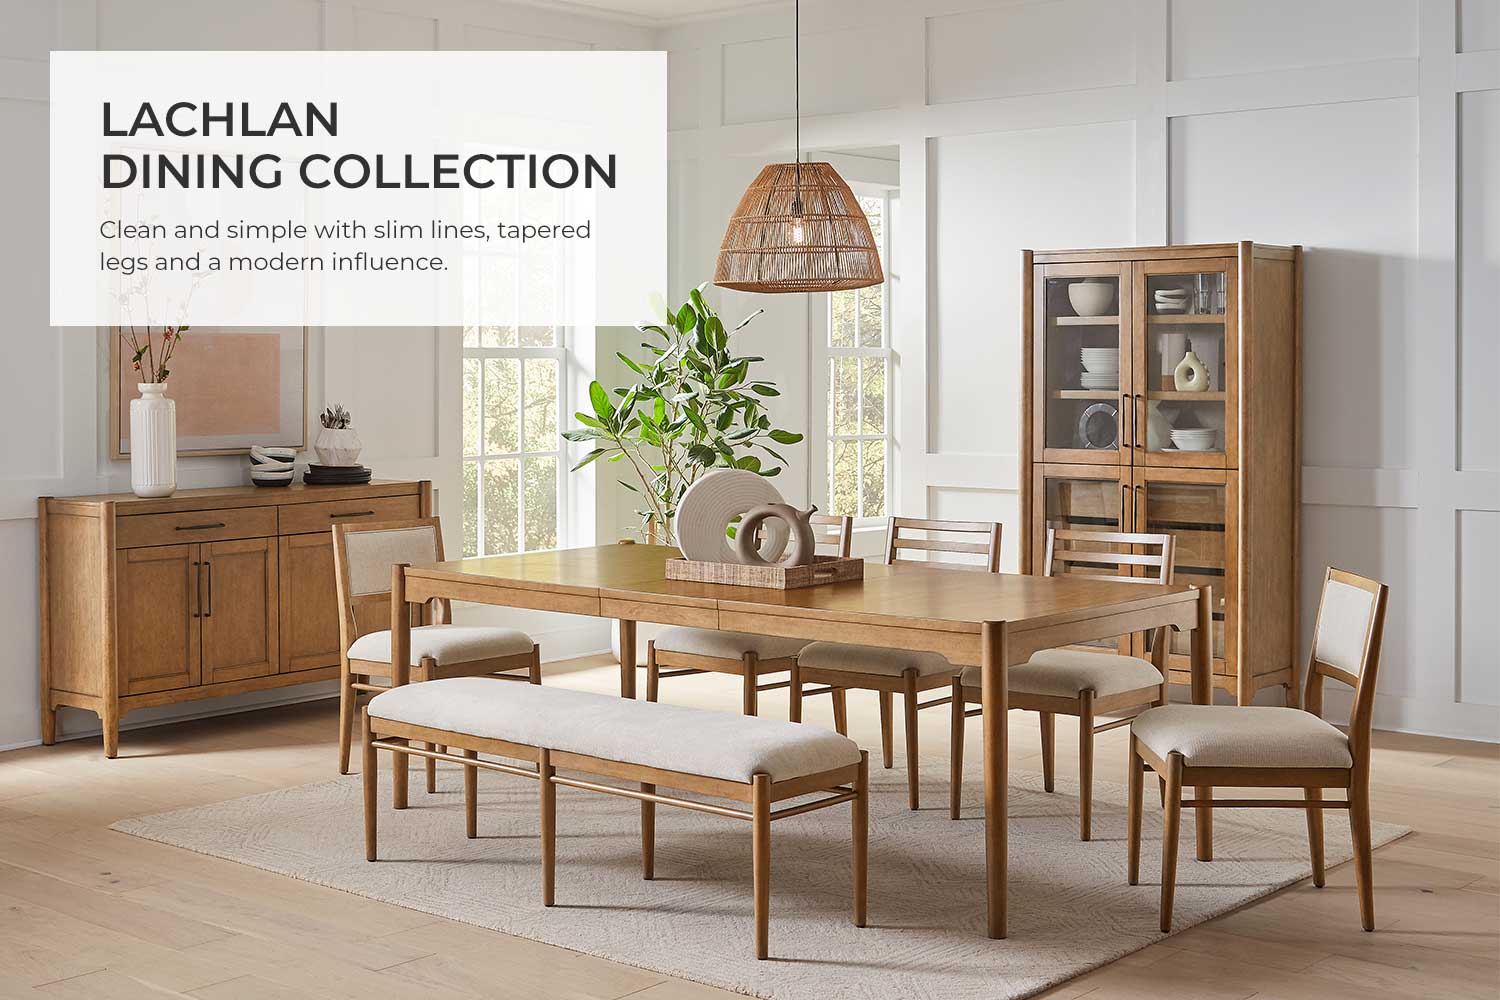 Lachlan Dining Collection